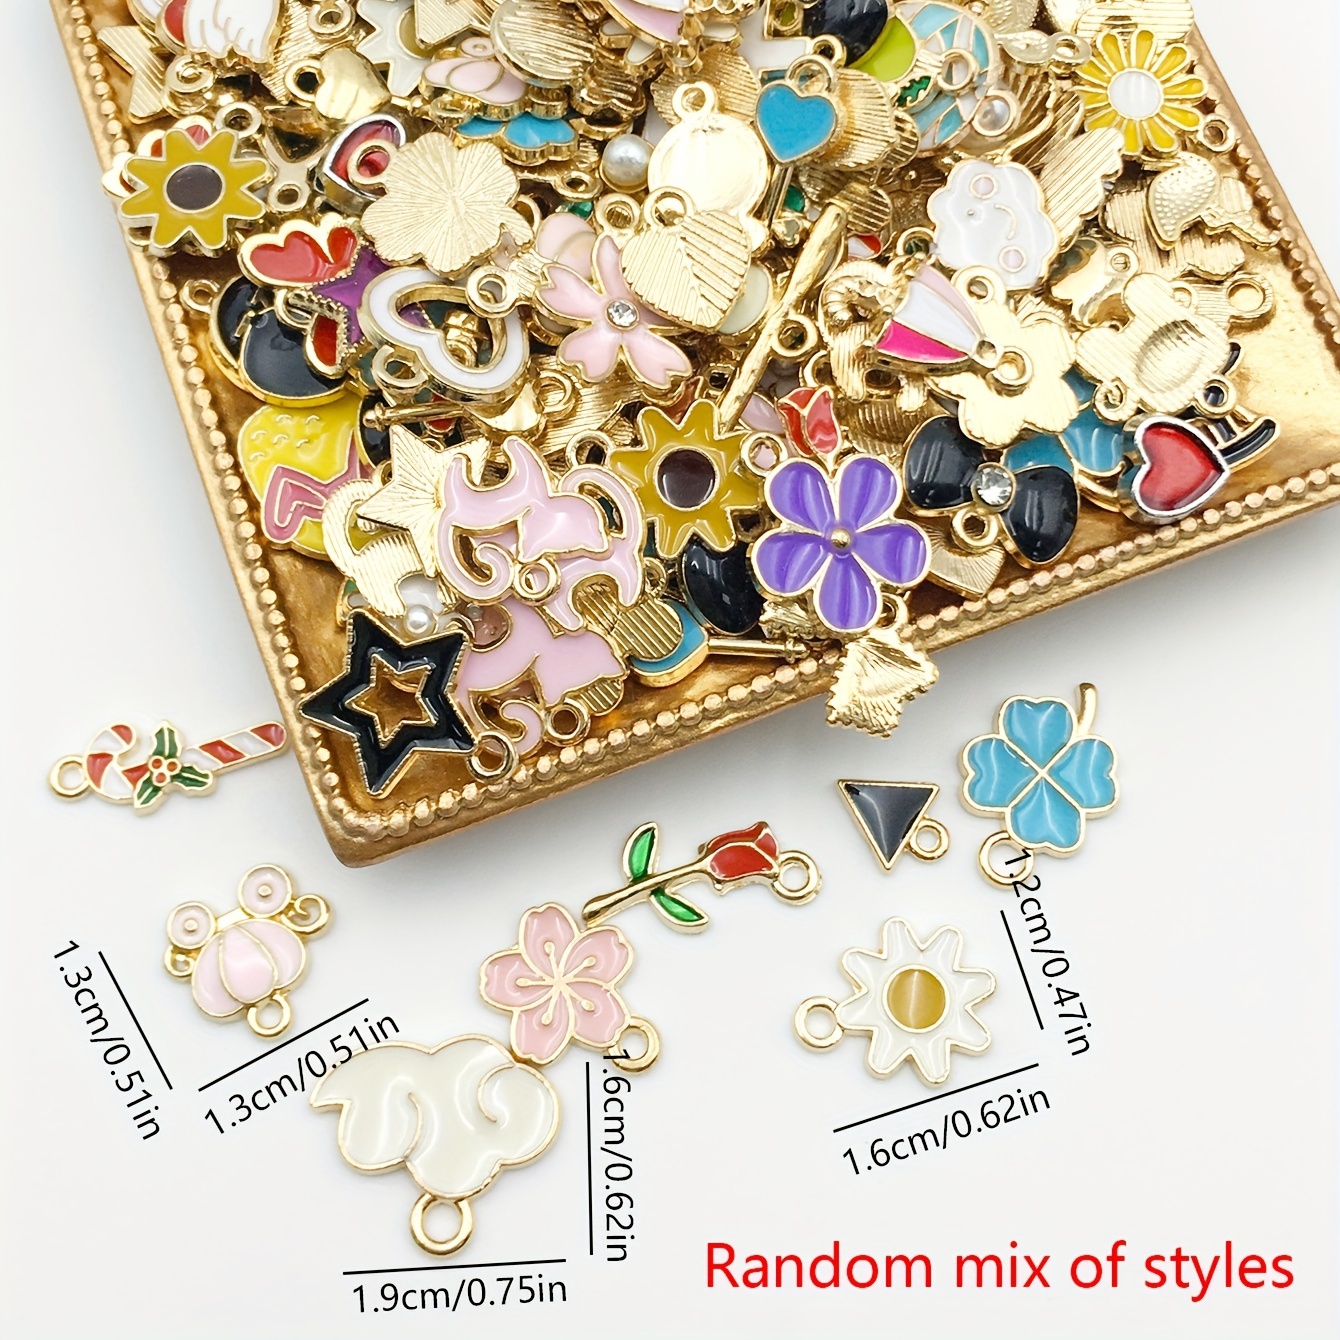 1 Pack Of 20-50pcs Random Mixed Enamel Bulk Charms, DIY Pendant For  Bracelet Necklace Earrings Jewelry Making, Christmas Jewelry Supplies